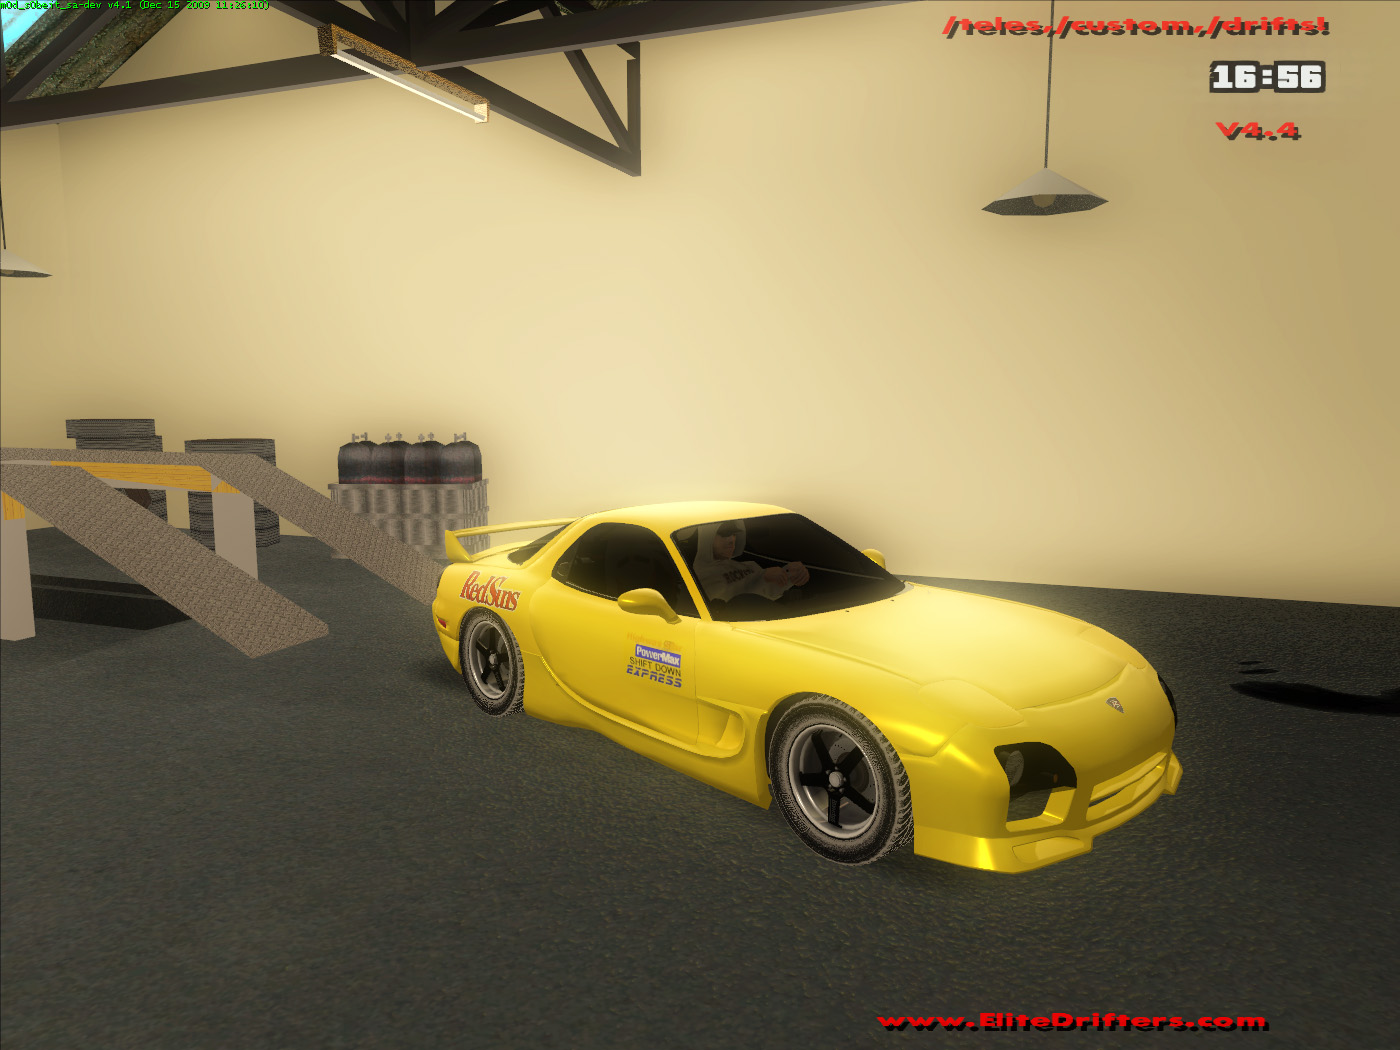 Yazzy Gta Mods Rx7 Fd3s Redsuns For Keisuke Initial D Pack